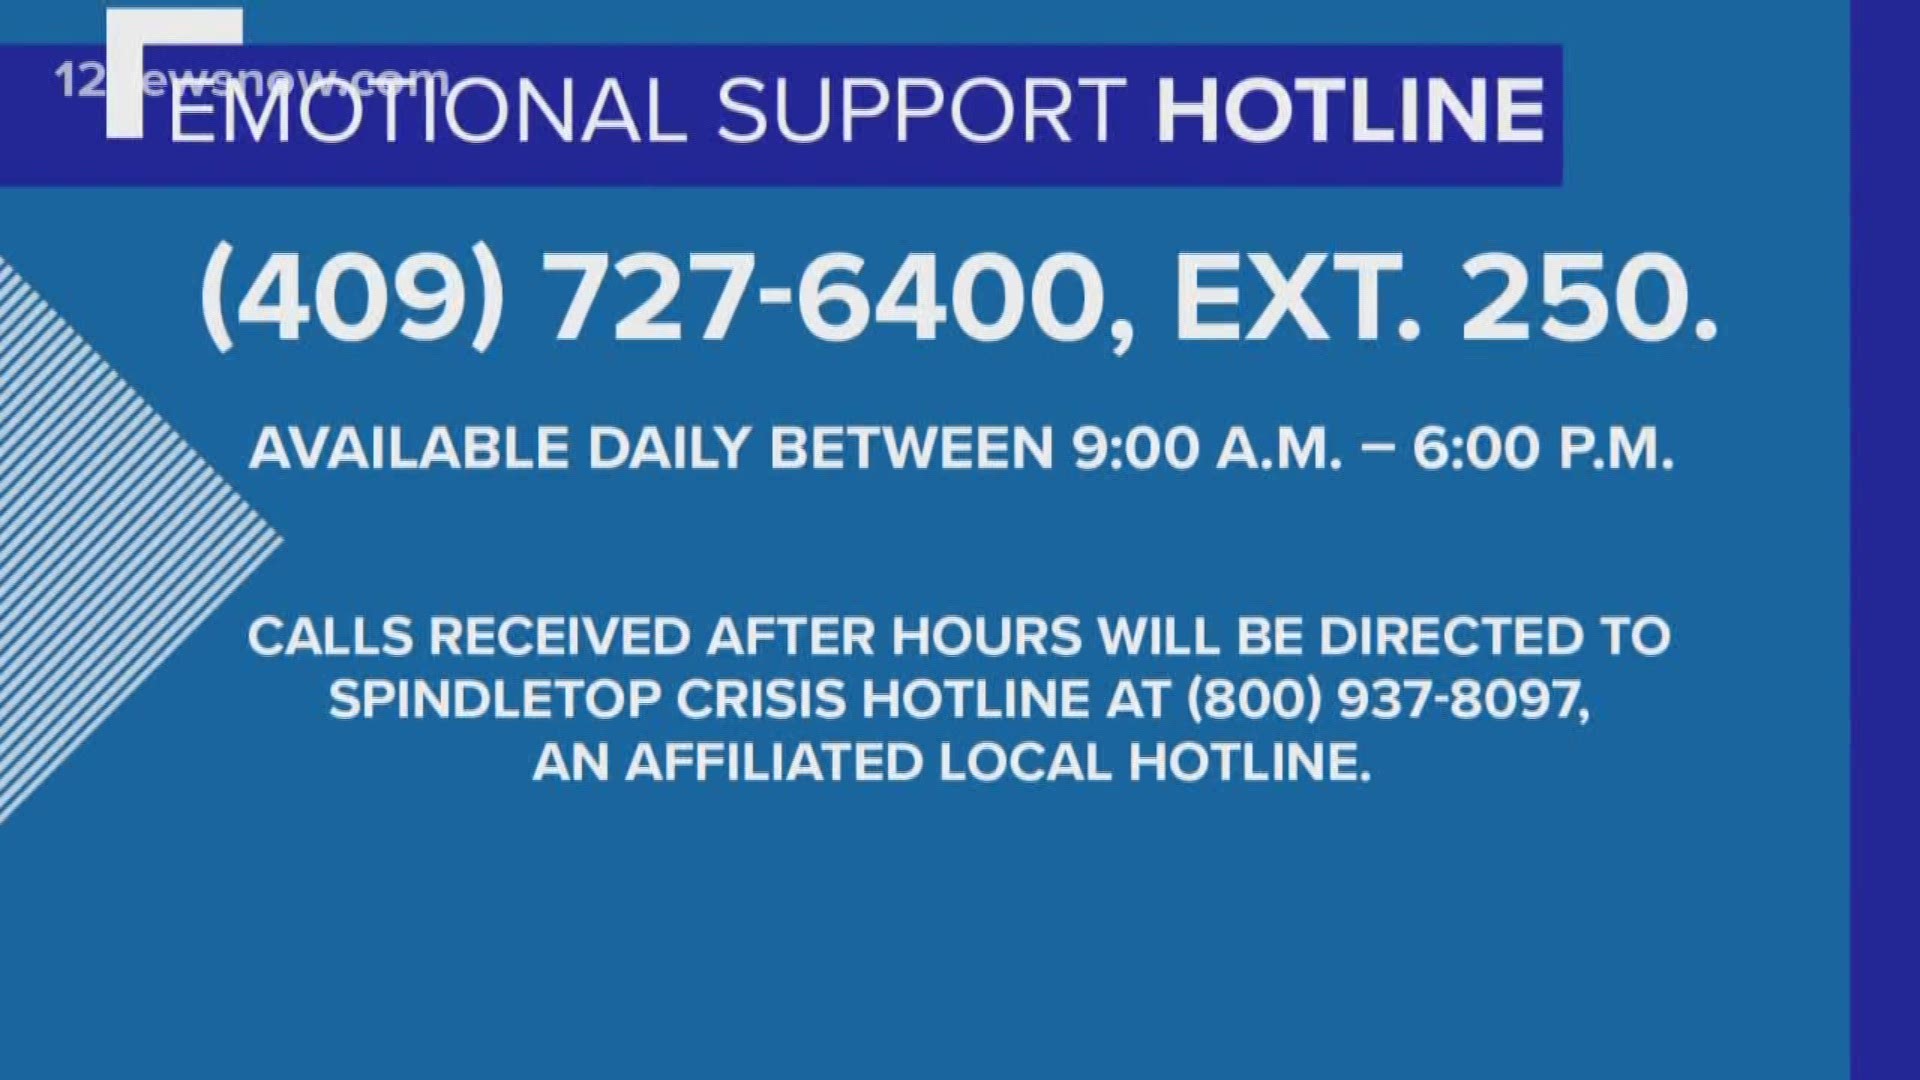 The emotional support hotline can be reached by calling (409)-727-6400, ext. 250 and will be available daily between 9 a.m. and 6 p.m.